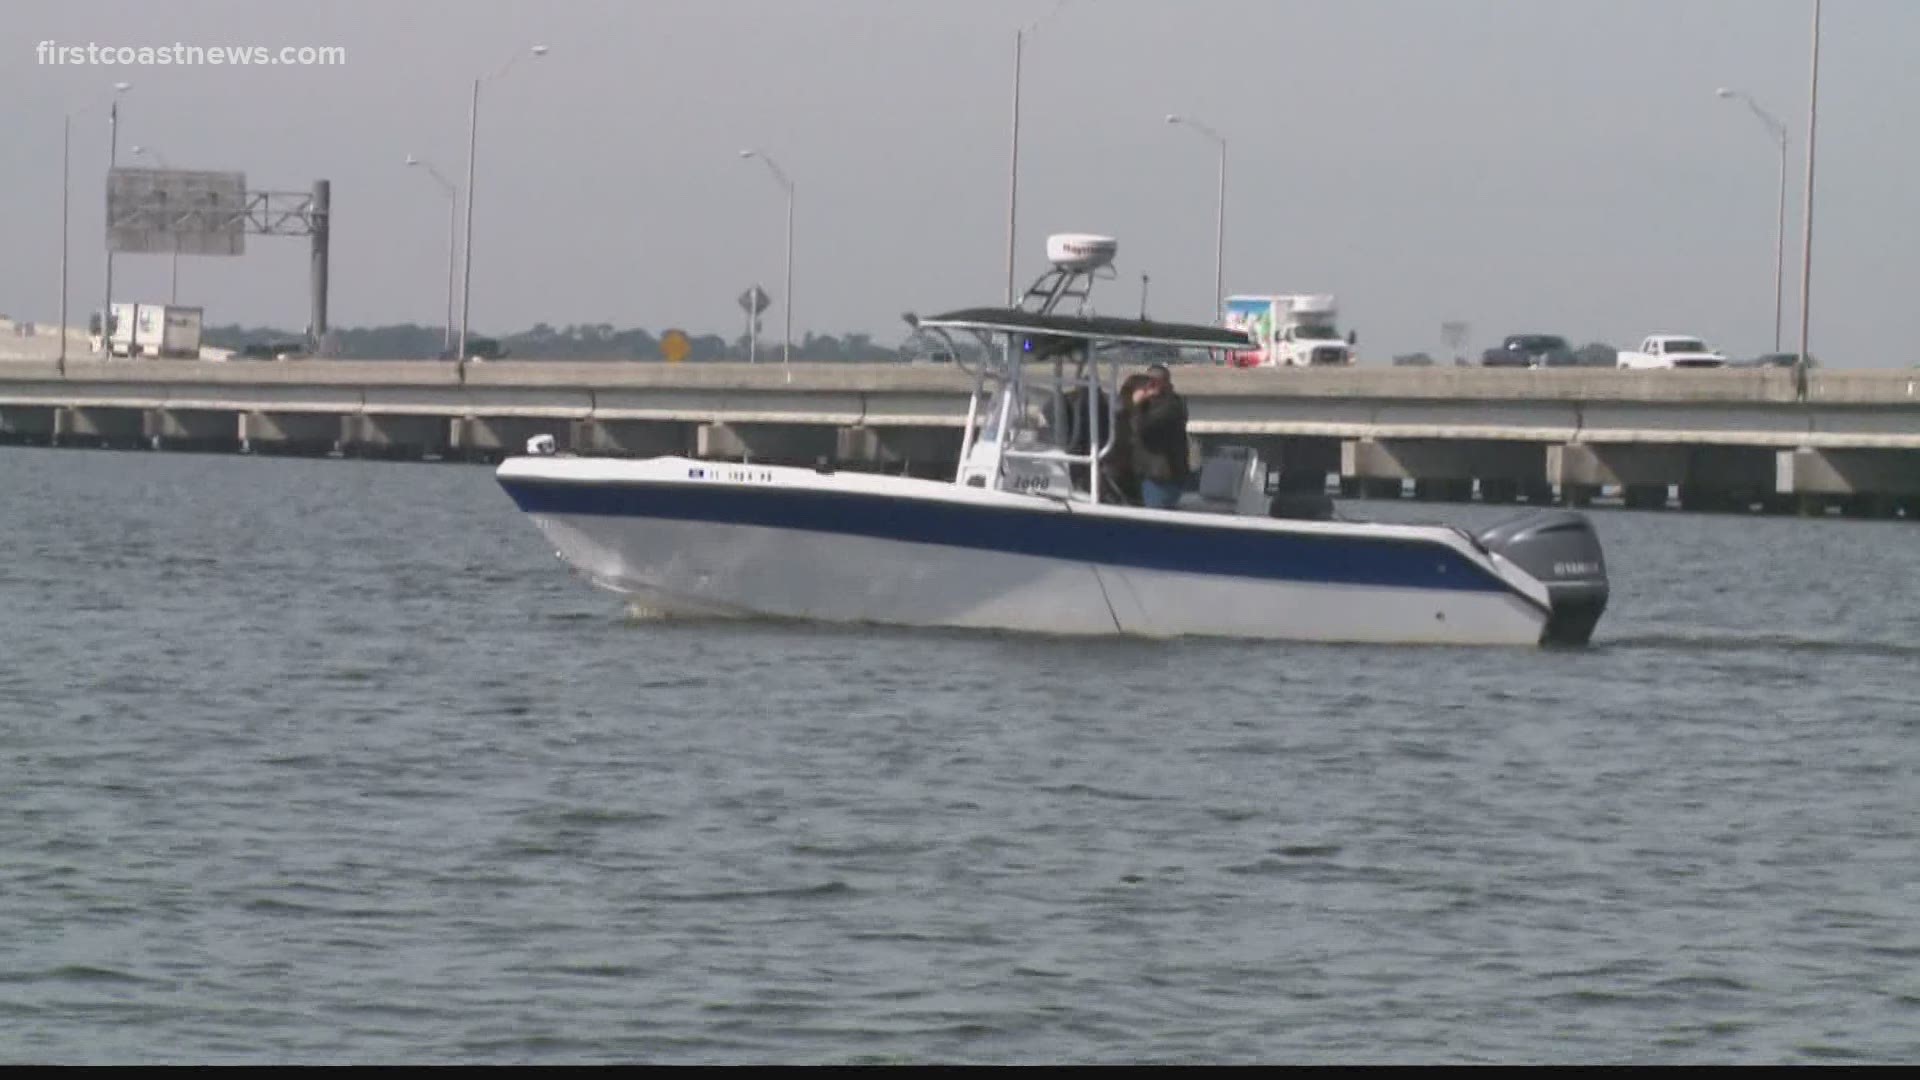 Search continues after crab boat gets stuck near Buckman Bridge, missing boater identified